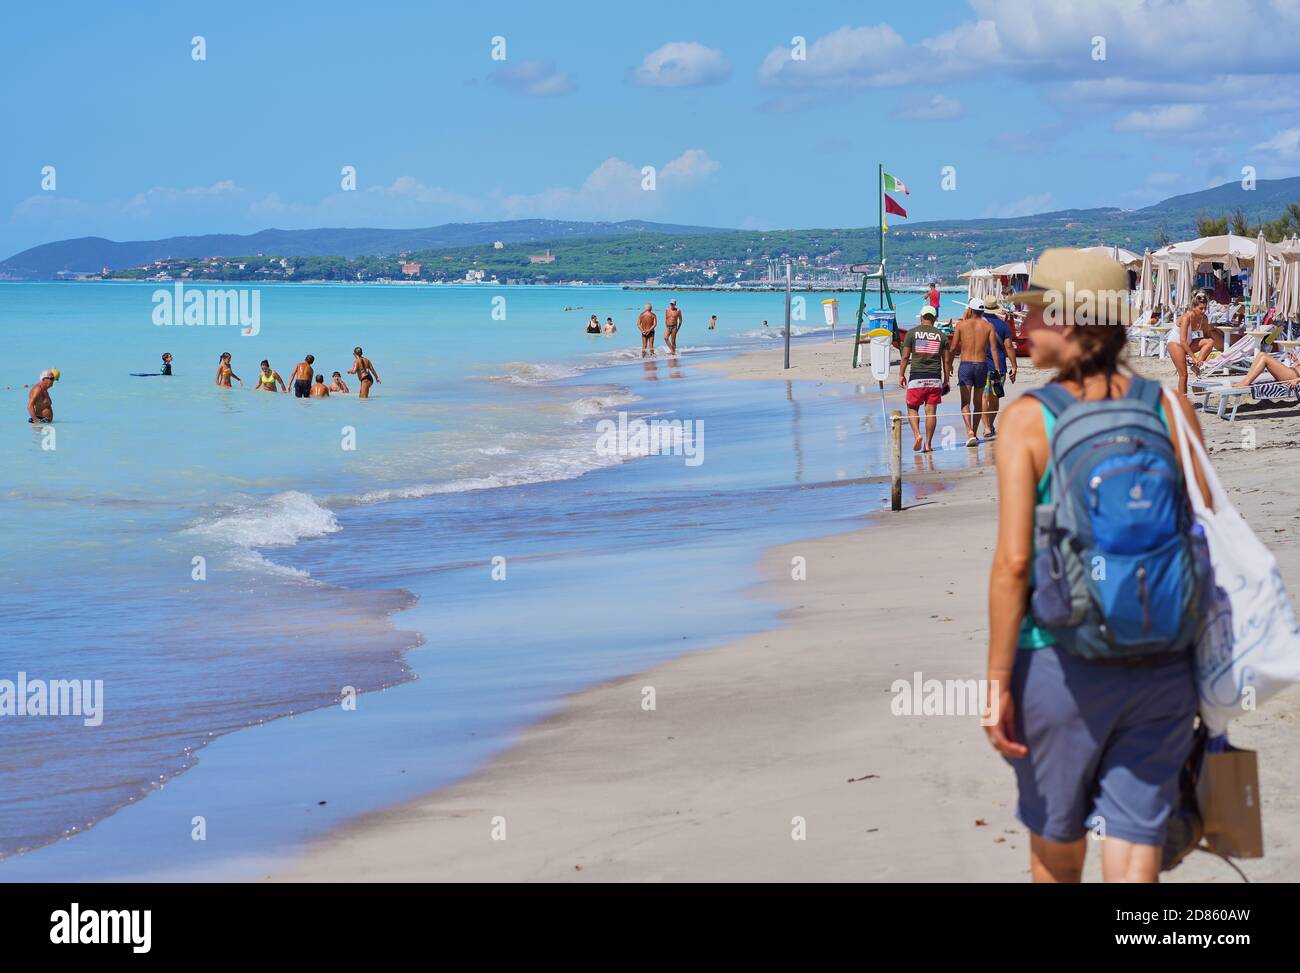 Tourists and local people enjoy “Spiagge Bianche”, the White Sand Beach in Rosignano Solvay, Italy, 1rd September, 2020. The beach is said to be highly toxic due to chemical pollution of a nearby factory in the 1990th, but still its a tourist attraction. © Peter Schatz / Alamy Stock Photos Stock Photo